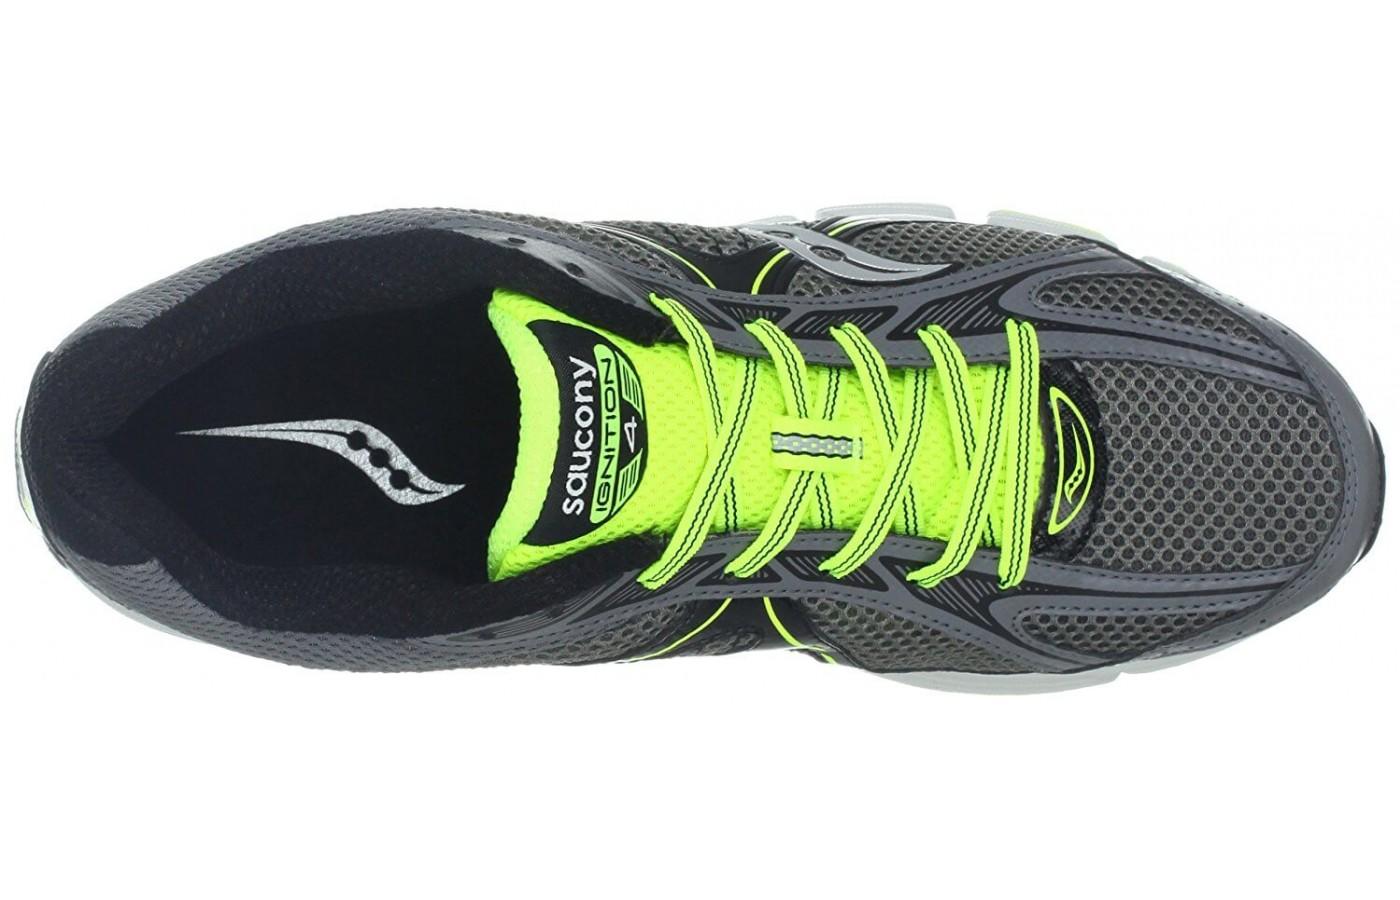 Saucony Ignition 4 has a highly breathable upper unit